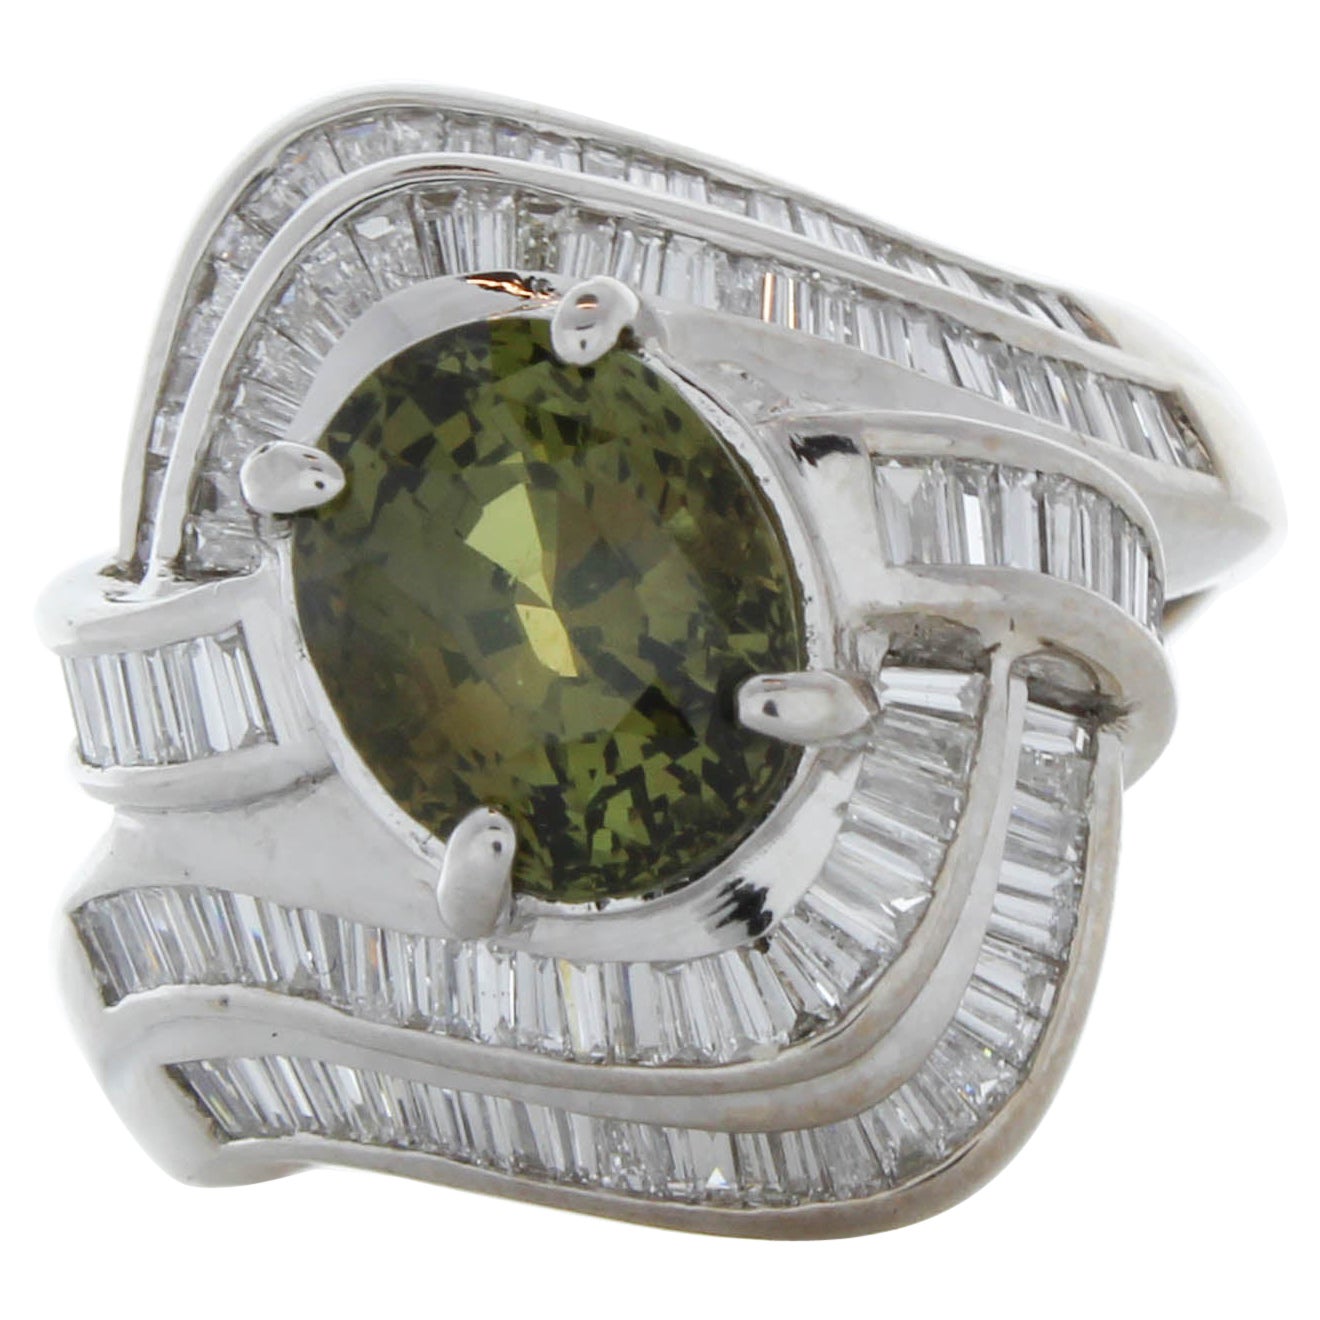 0.69 Carat Oval Emerald & Diamond Cocktail Ring in 18K White Gold